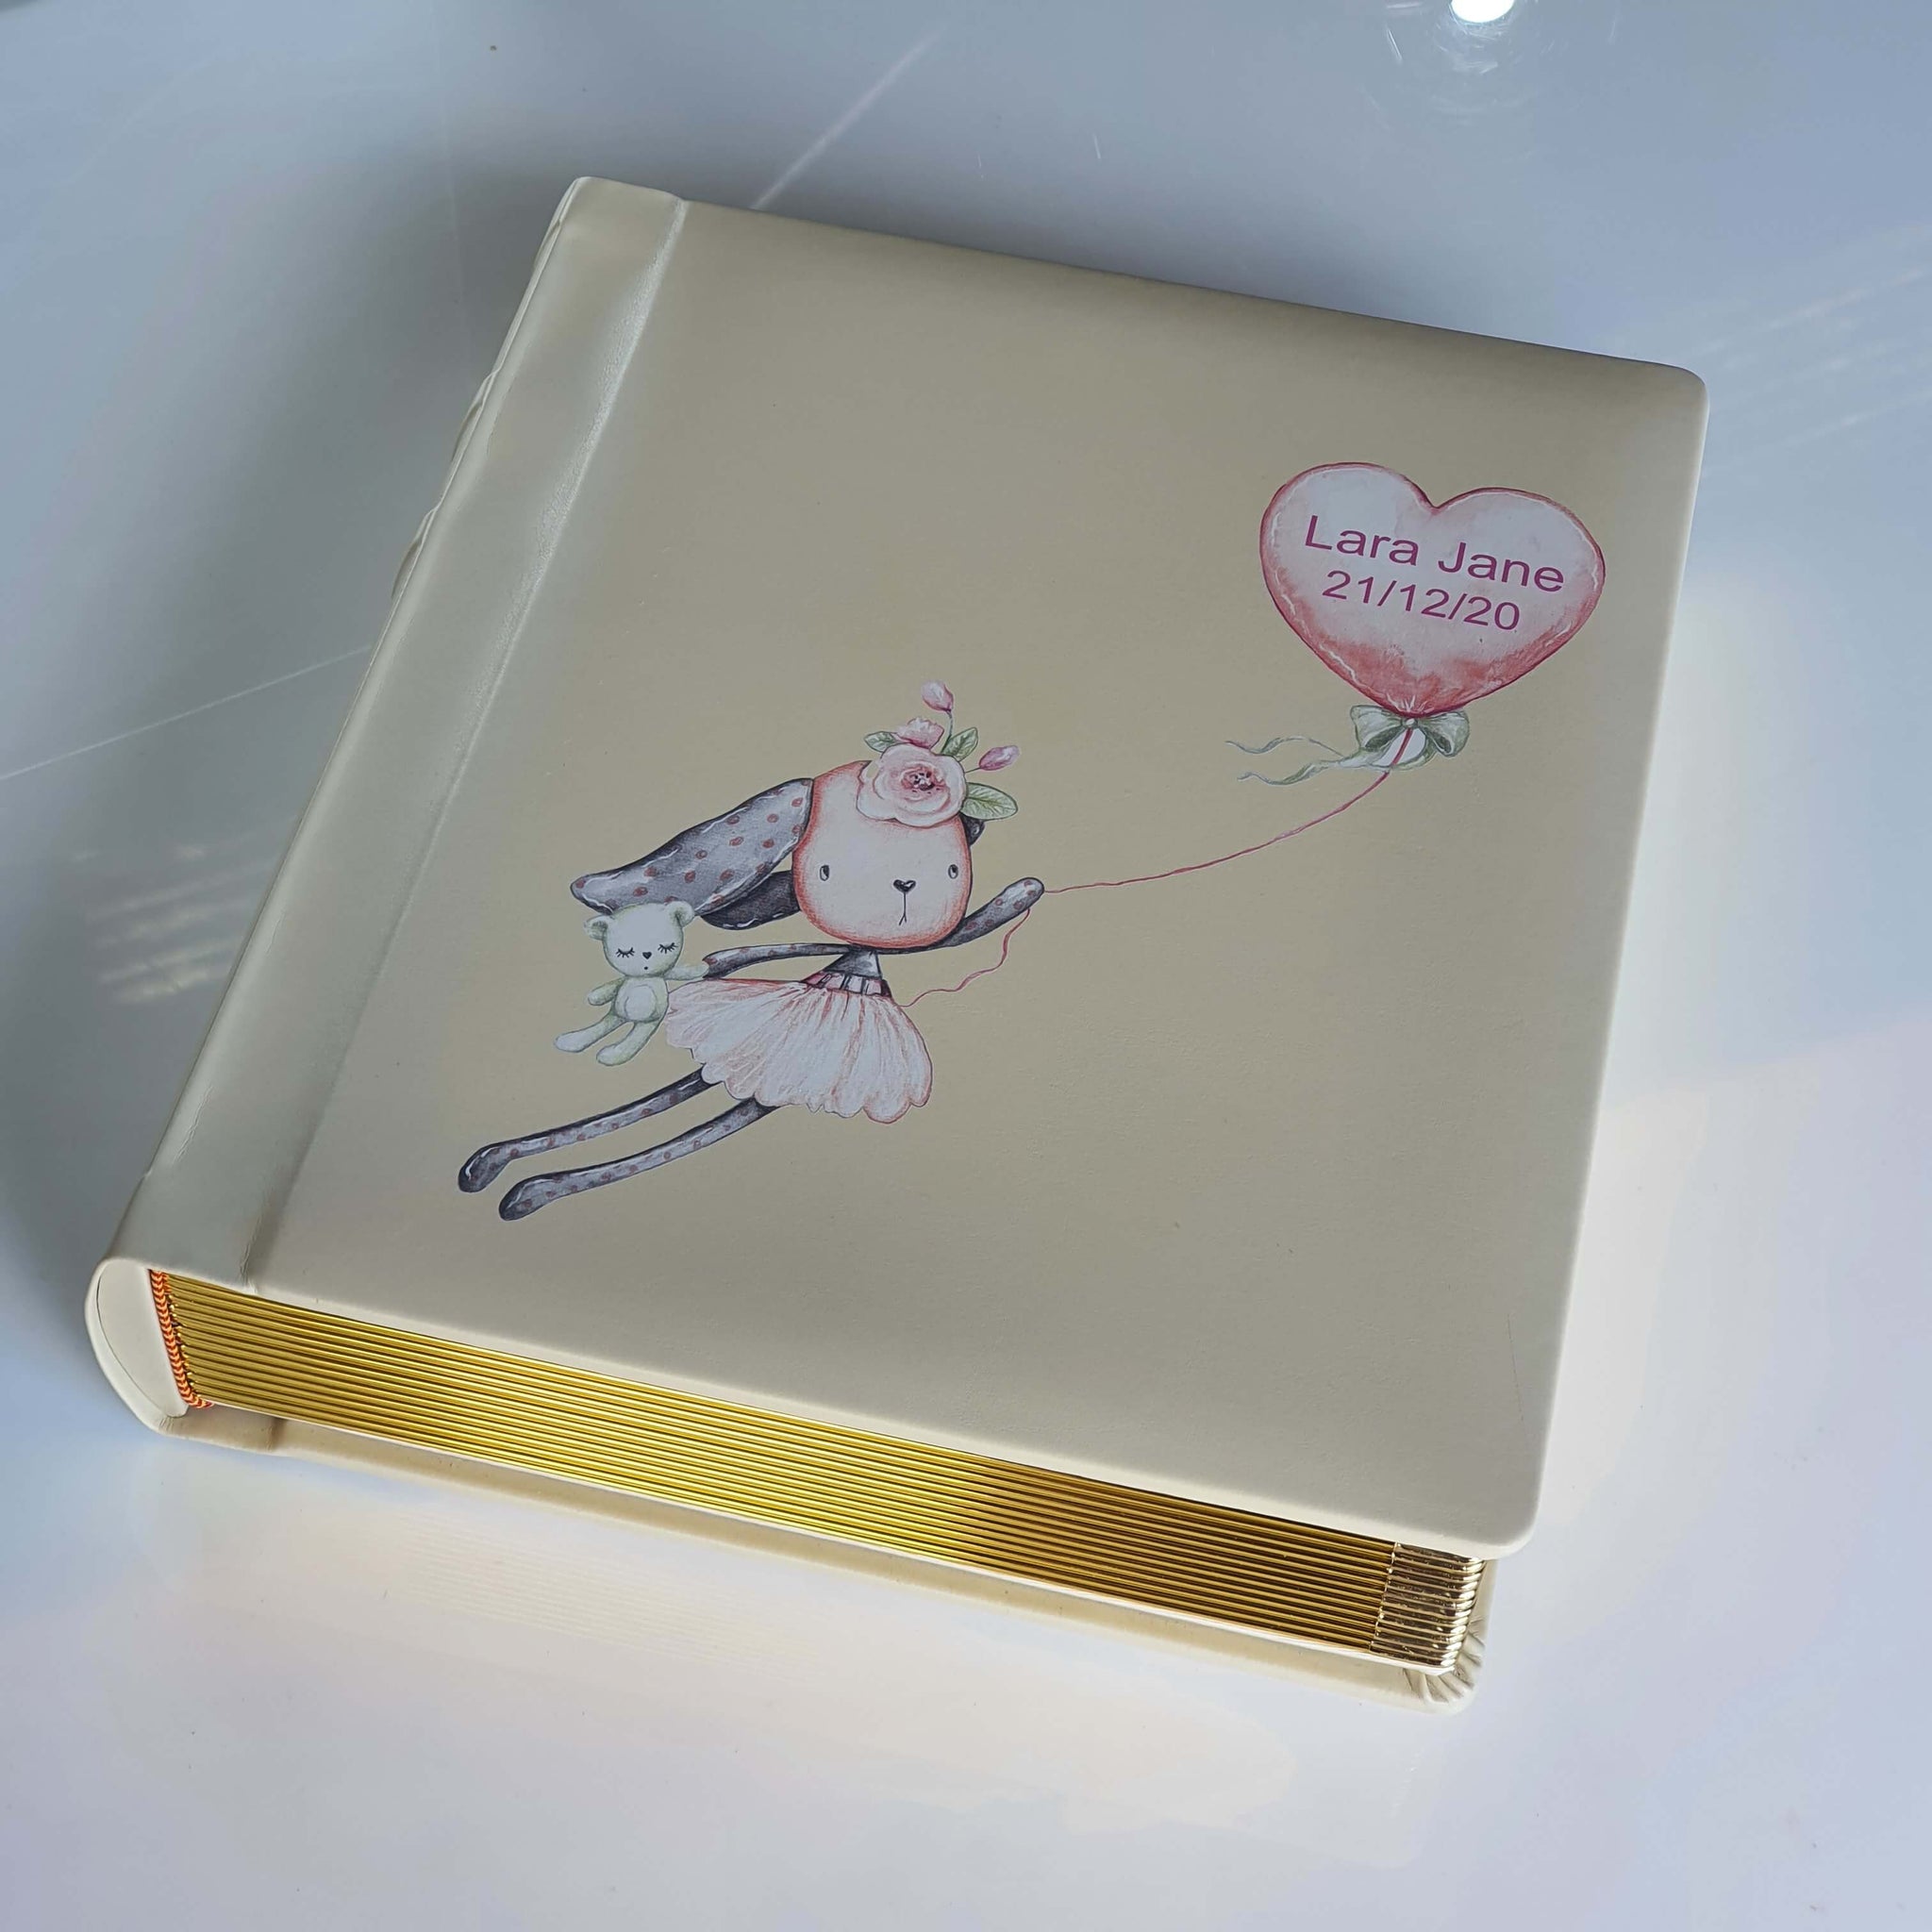 Classic Slip-in Photo Albums for 5x7 Prints - Personalise Cover Option -  The Photographer's Toolbox